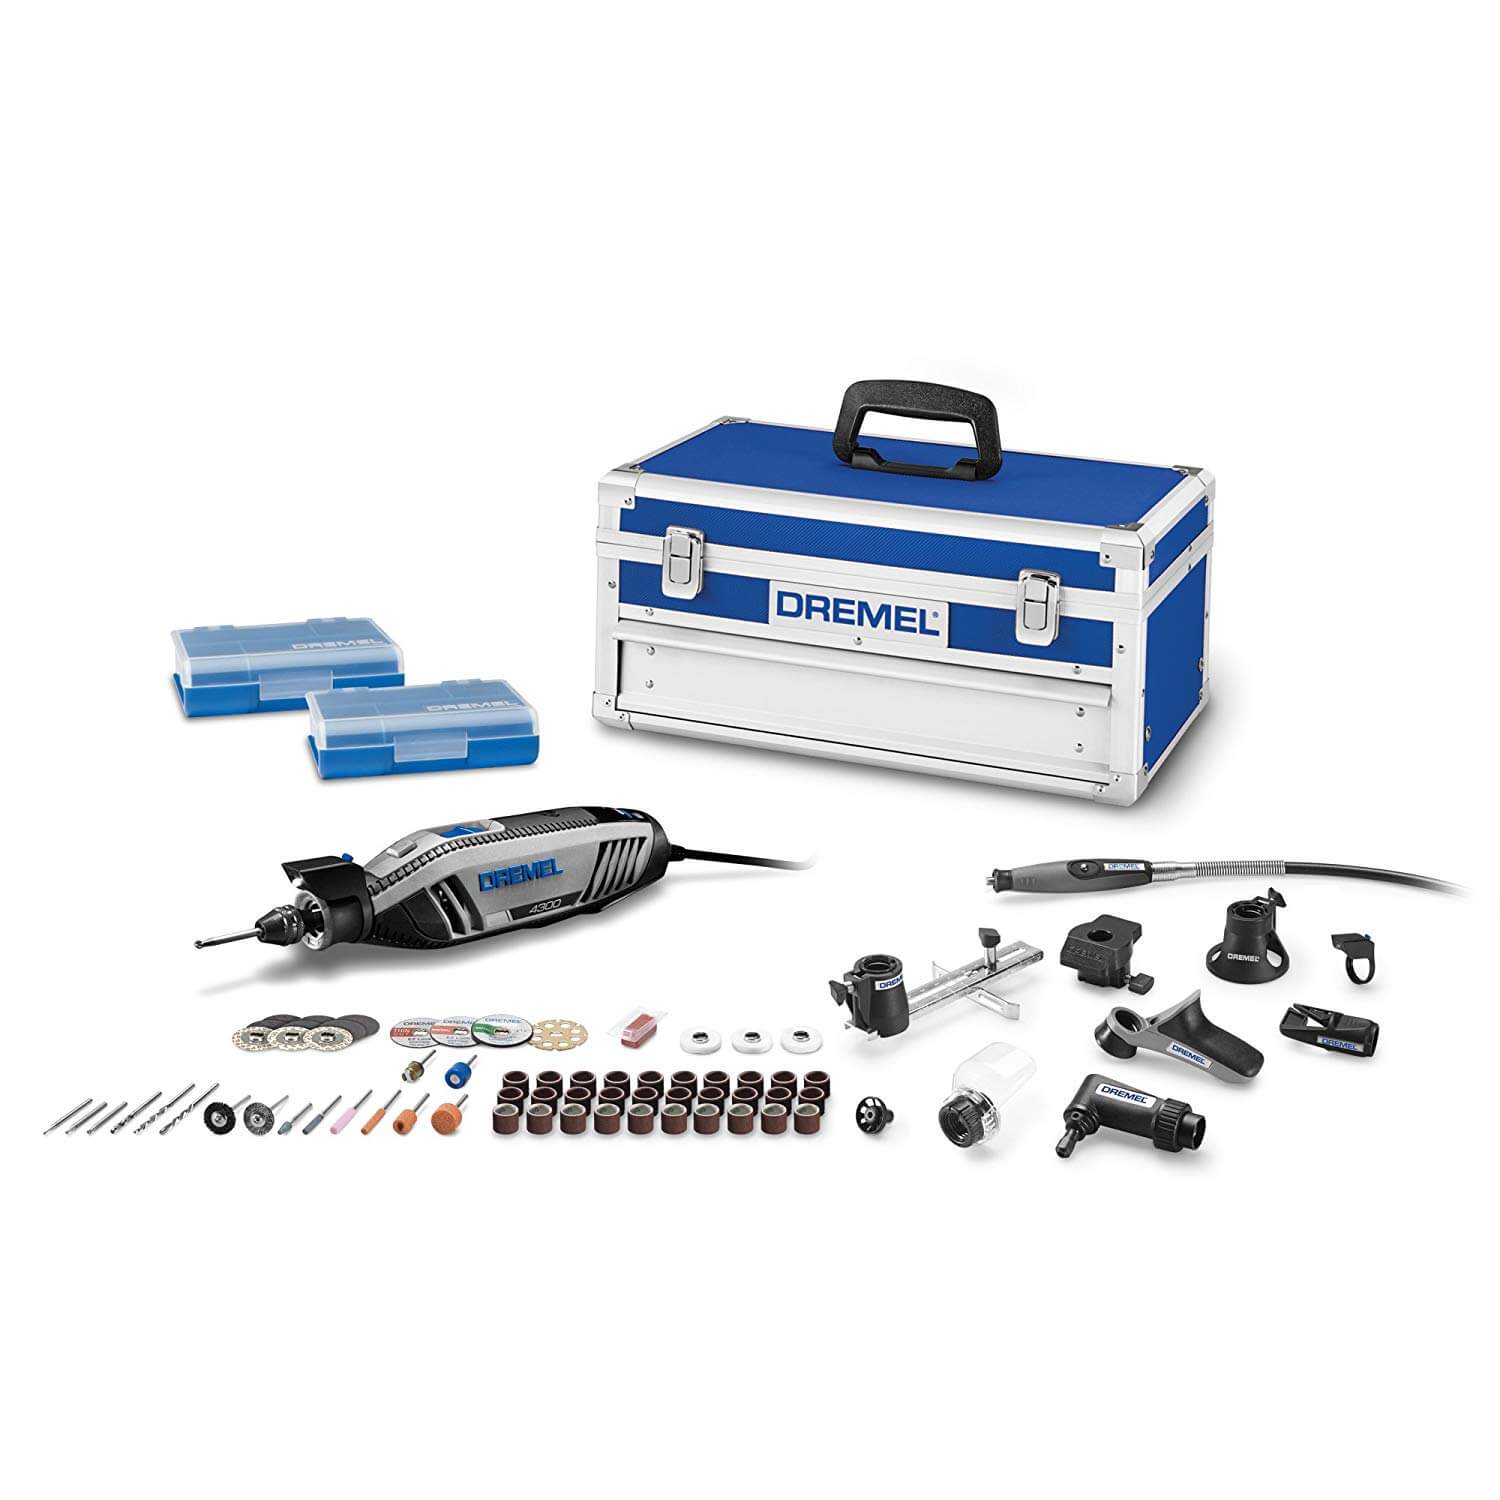 Dremel 4300 964 - Series 1.8 Amp Corded Variable Speed Rotary Tool Kit with Case (45 Accessor - wise-line-tools